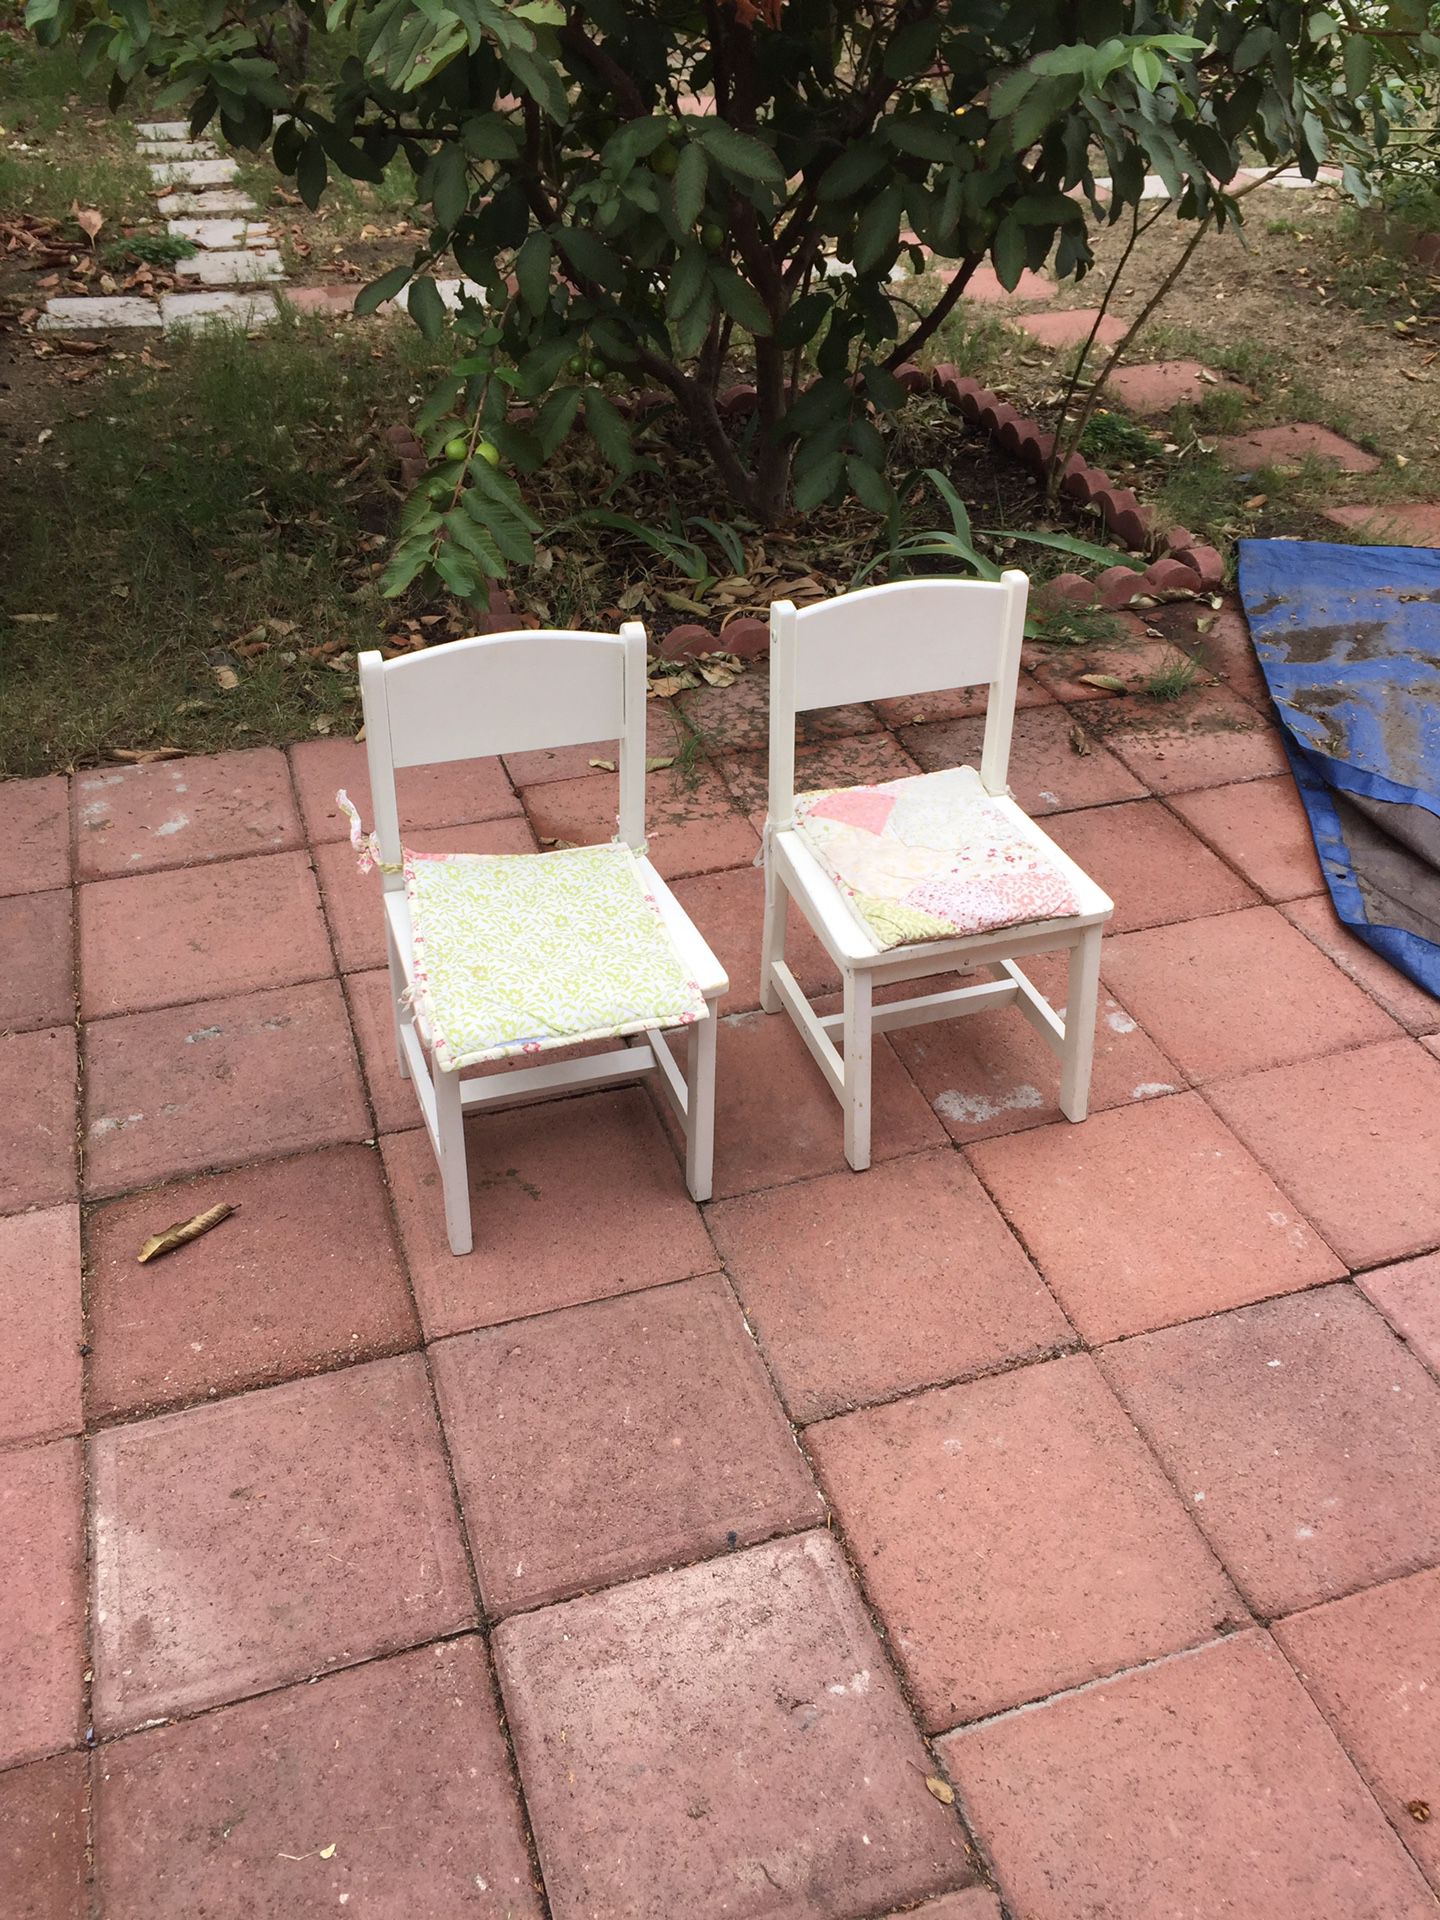 Little chairs for kids